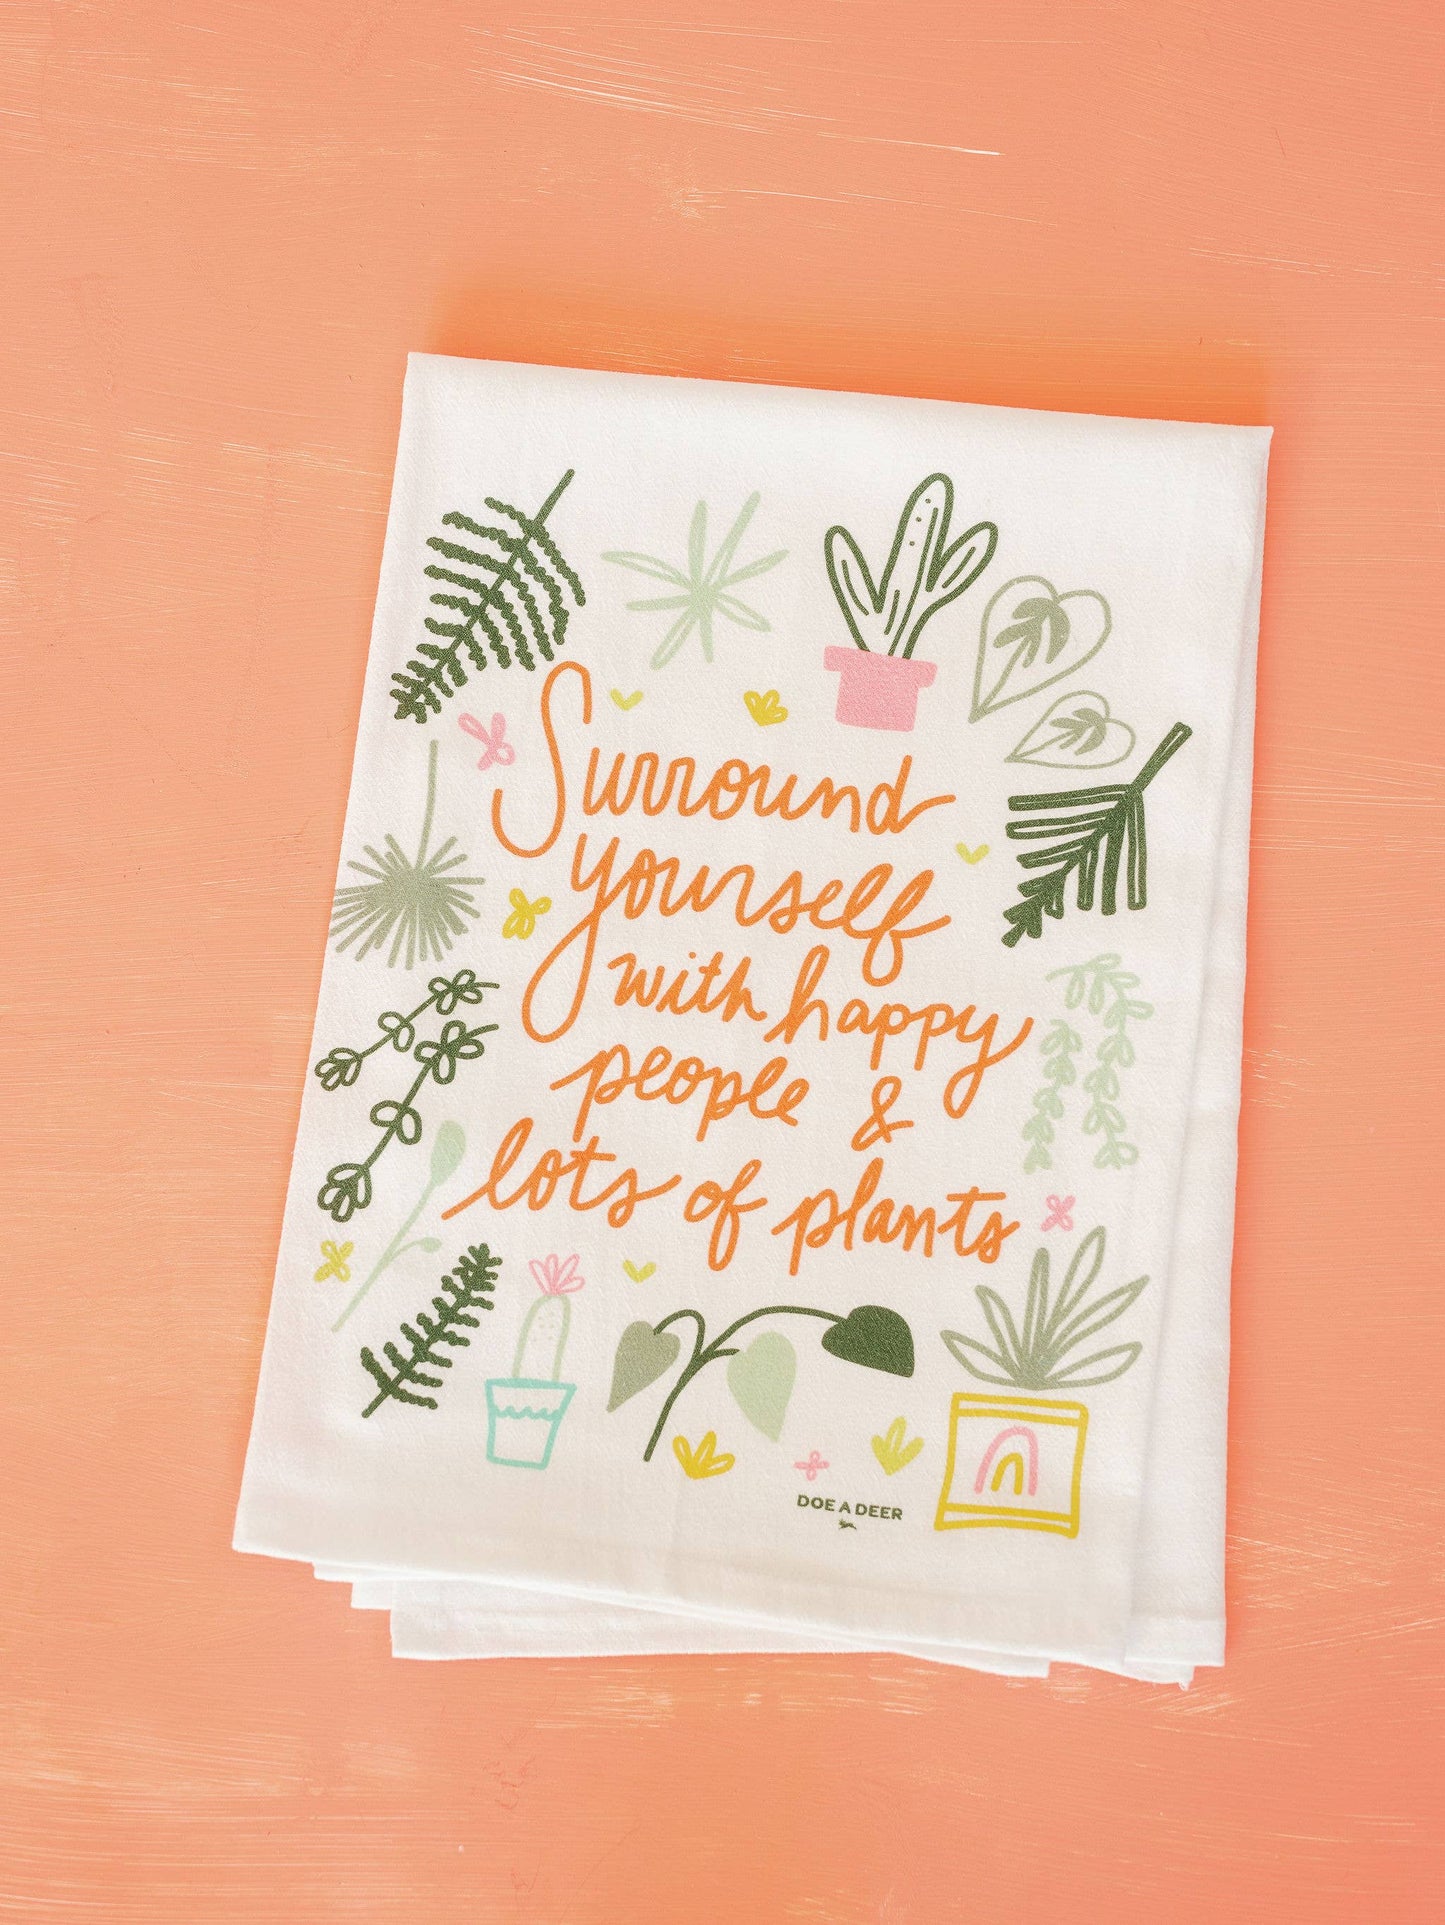 Buy one (1) machine-washable flour sack towel with a plant-themed happy message.